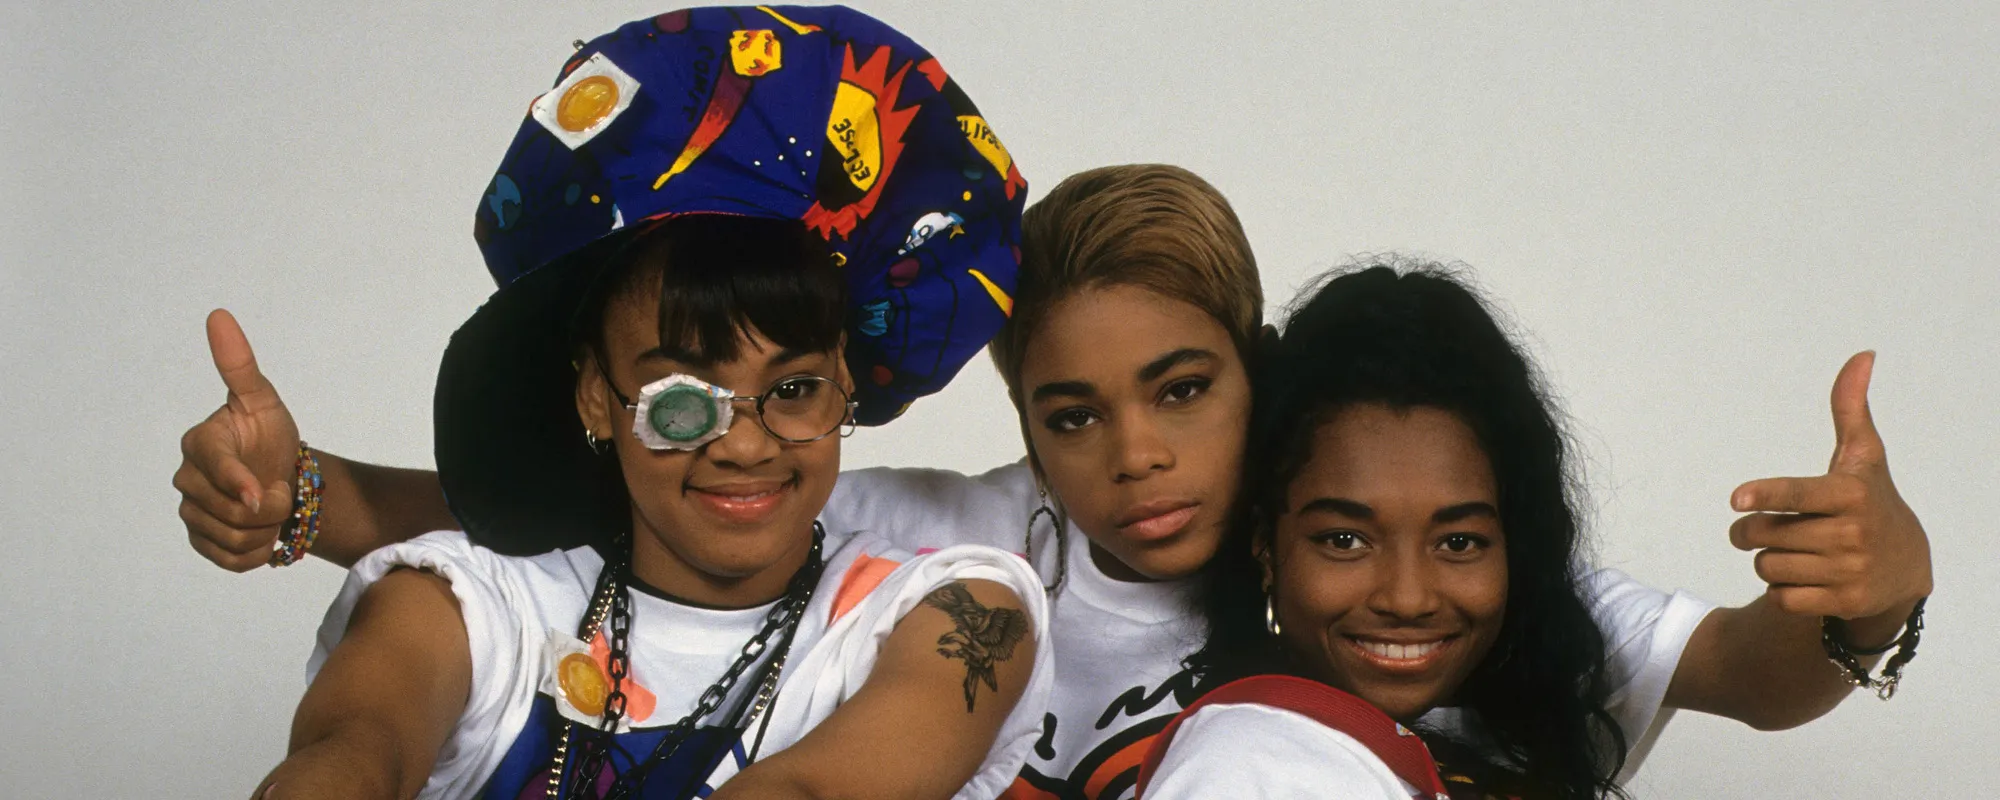 Behind the Mysterious Death of TLC’s Lisa “Left Eye” Lopes